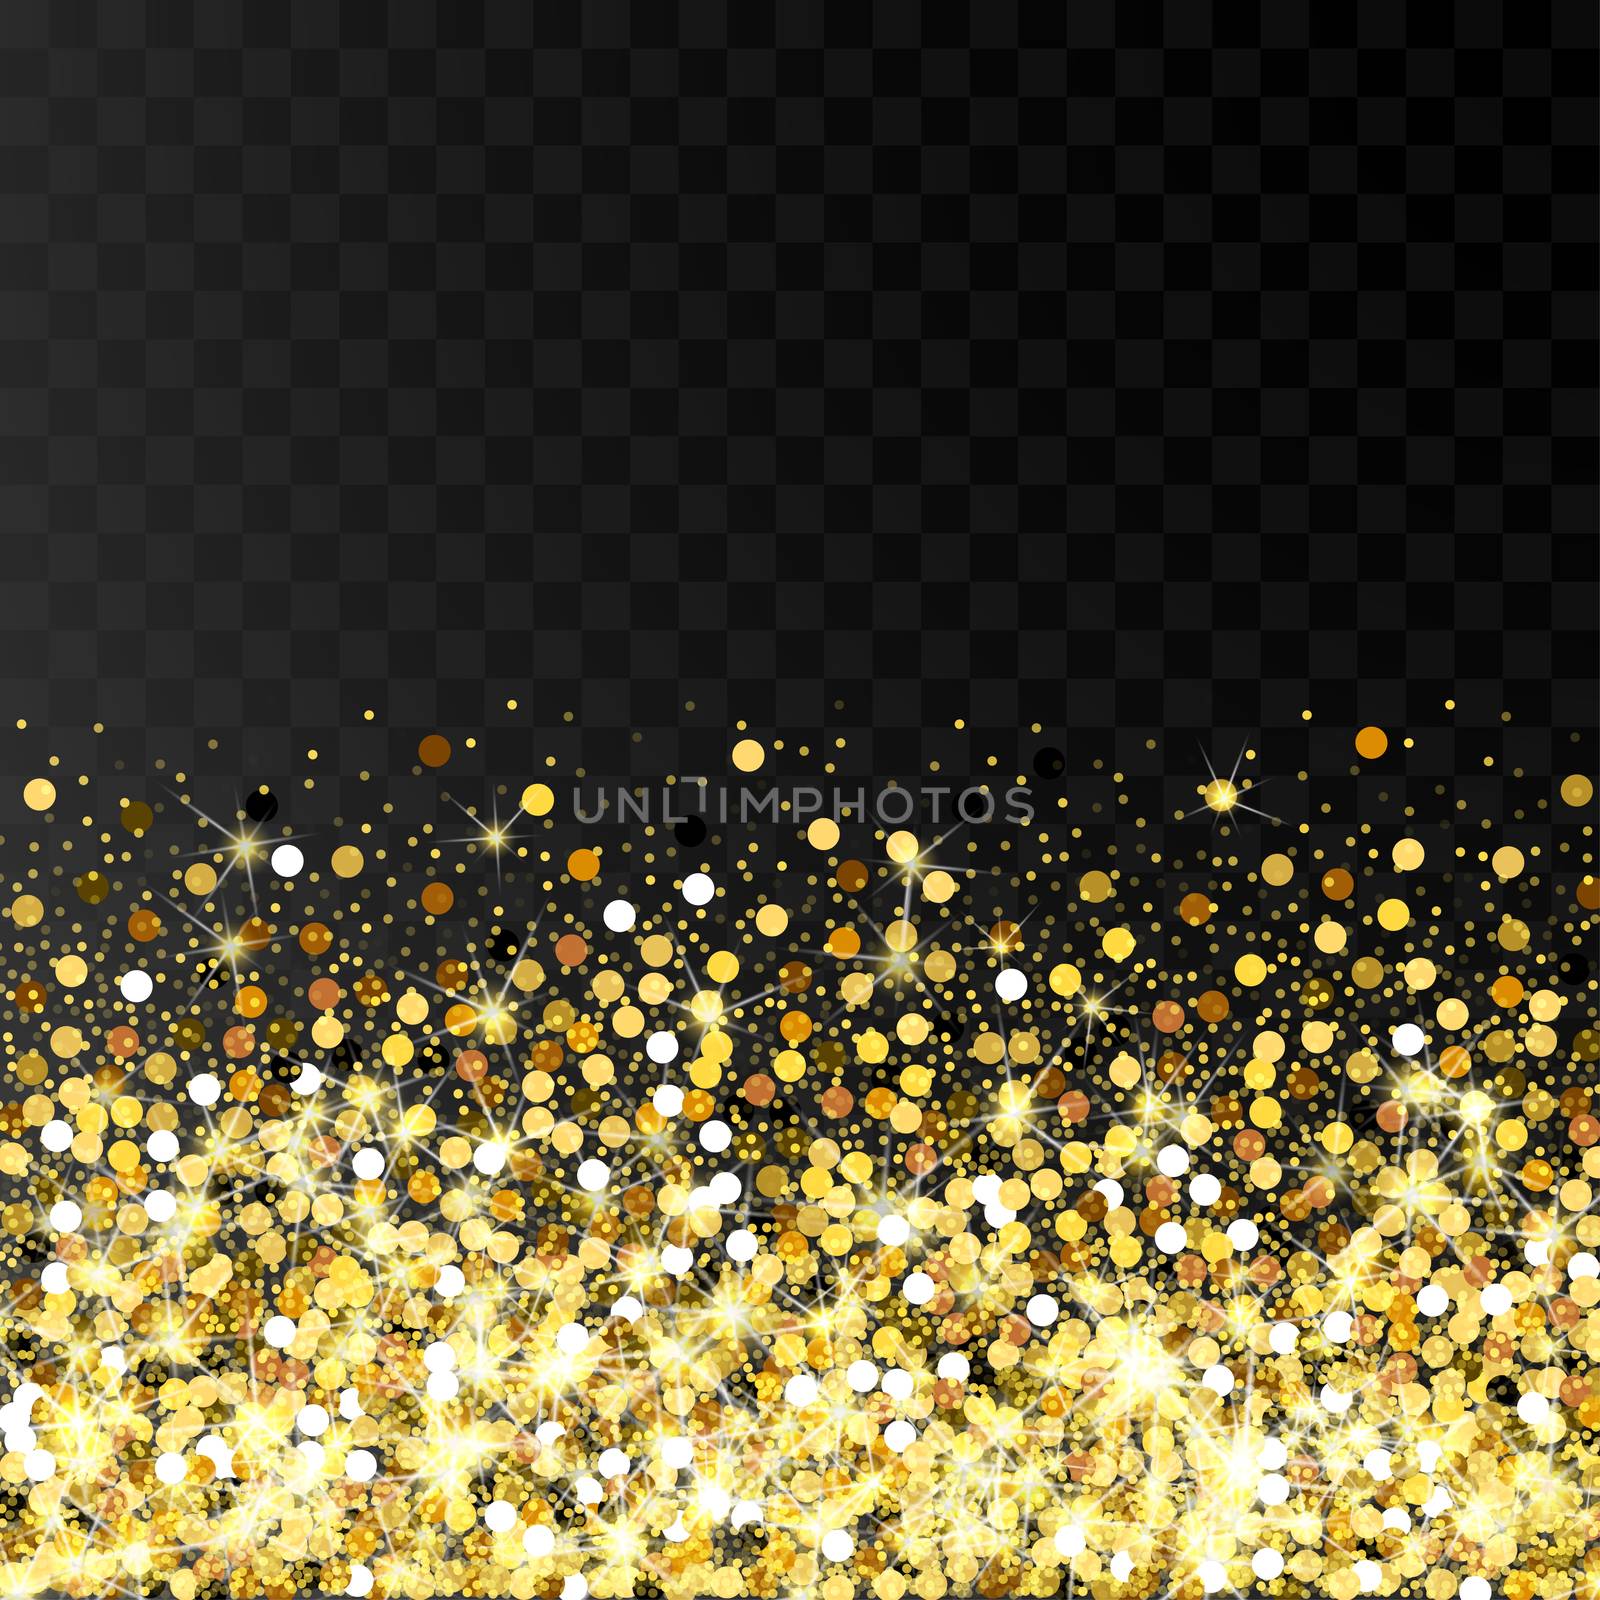 Falling golden particles on a black background. Scattered golden confetti. Bright shining gold. Rich luxury fashion glitter backdrop. Gold round dots.